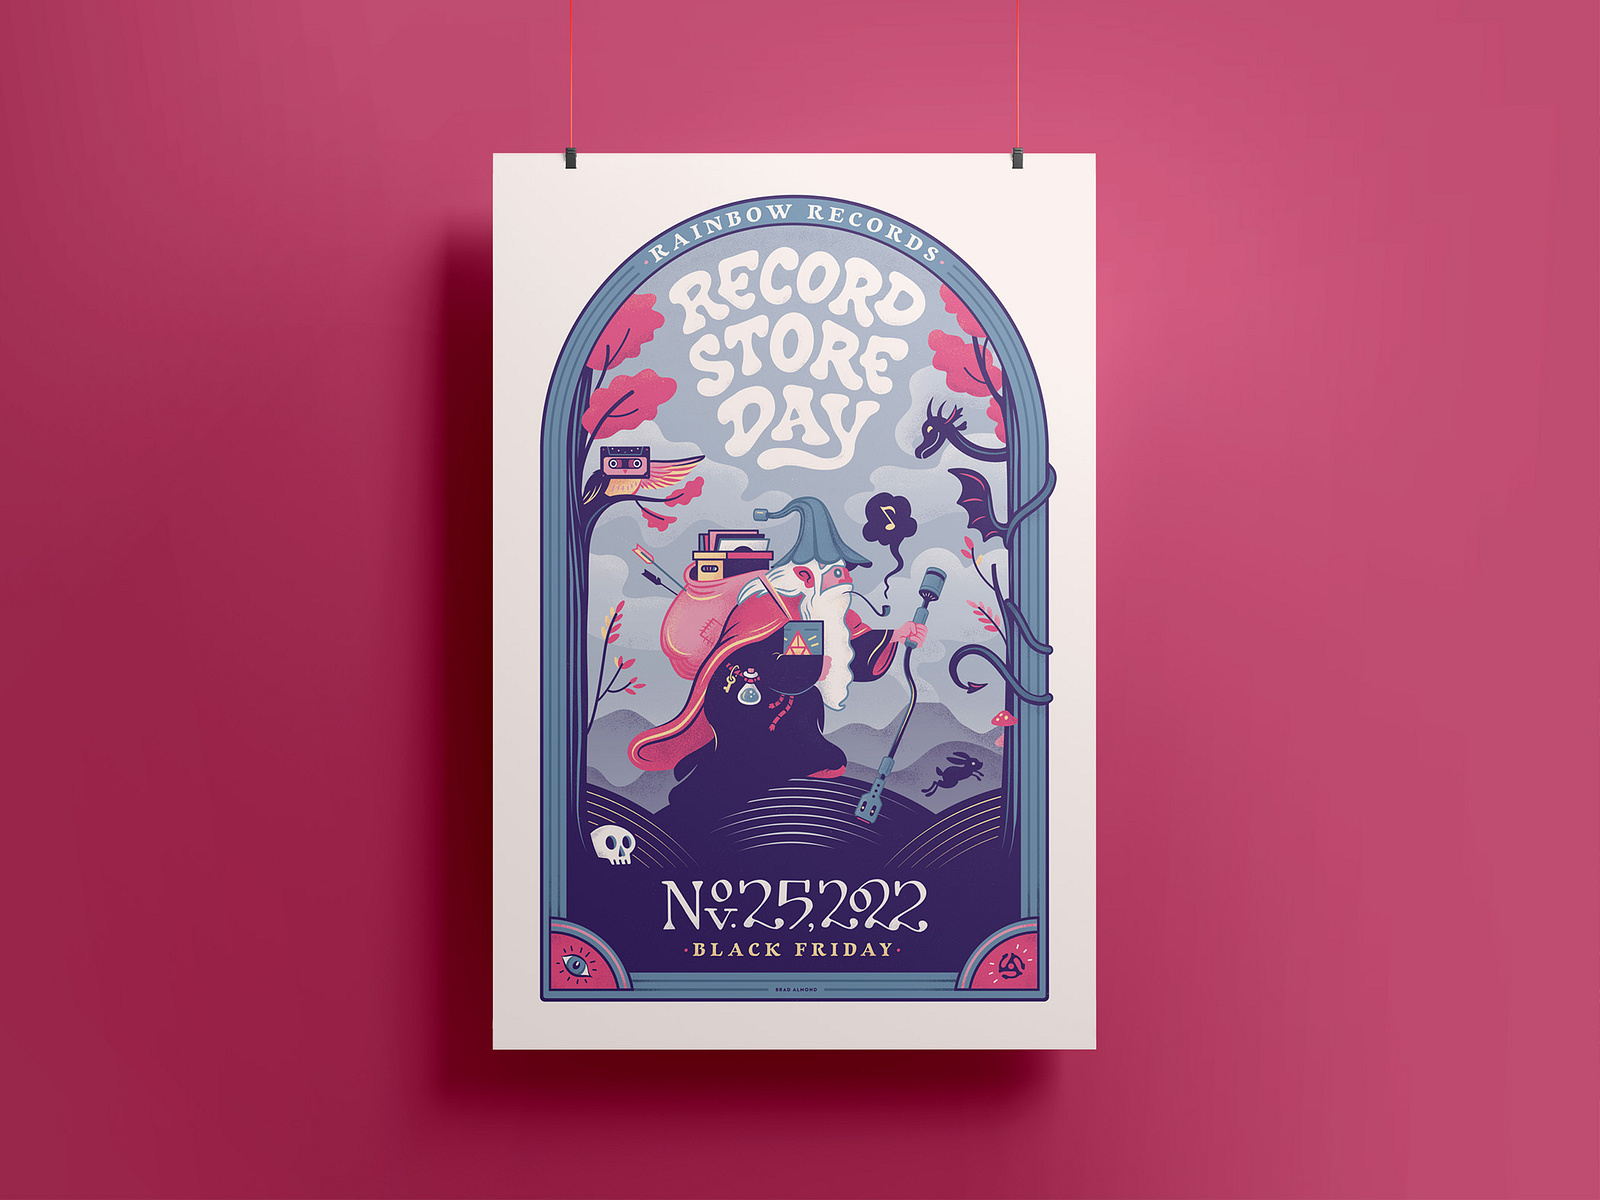 RSD Black Friday poster by Brad Almond on Dribbble